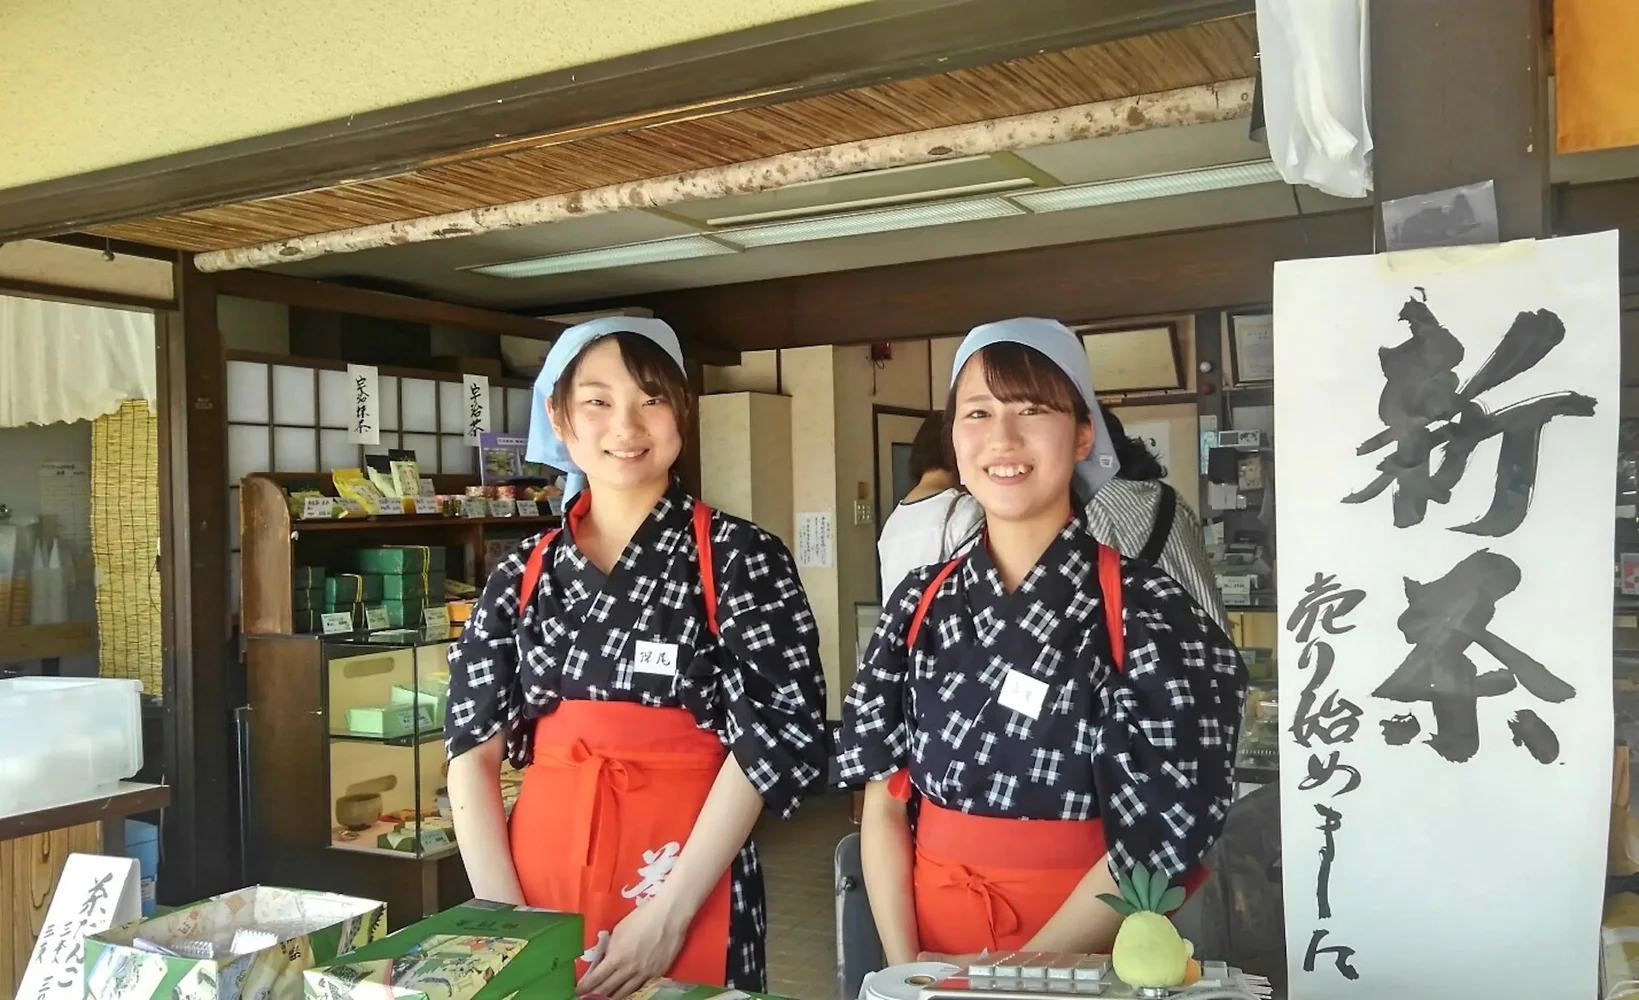 Book a Matcha Tour in Uji, the Home of Green Tea in Kyoto!